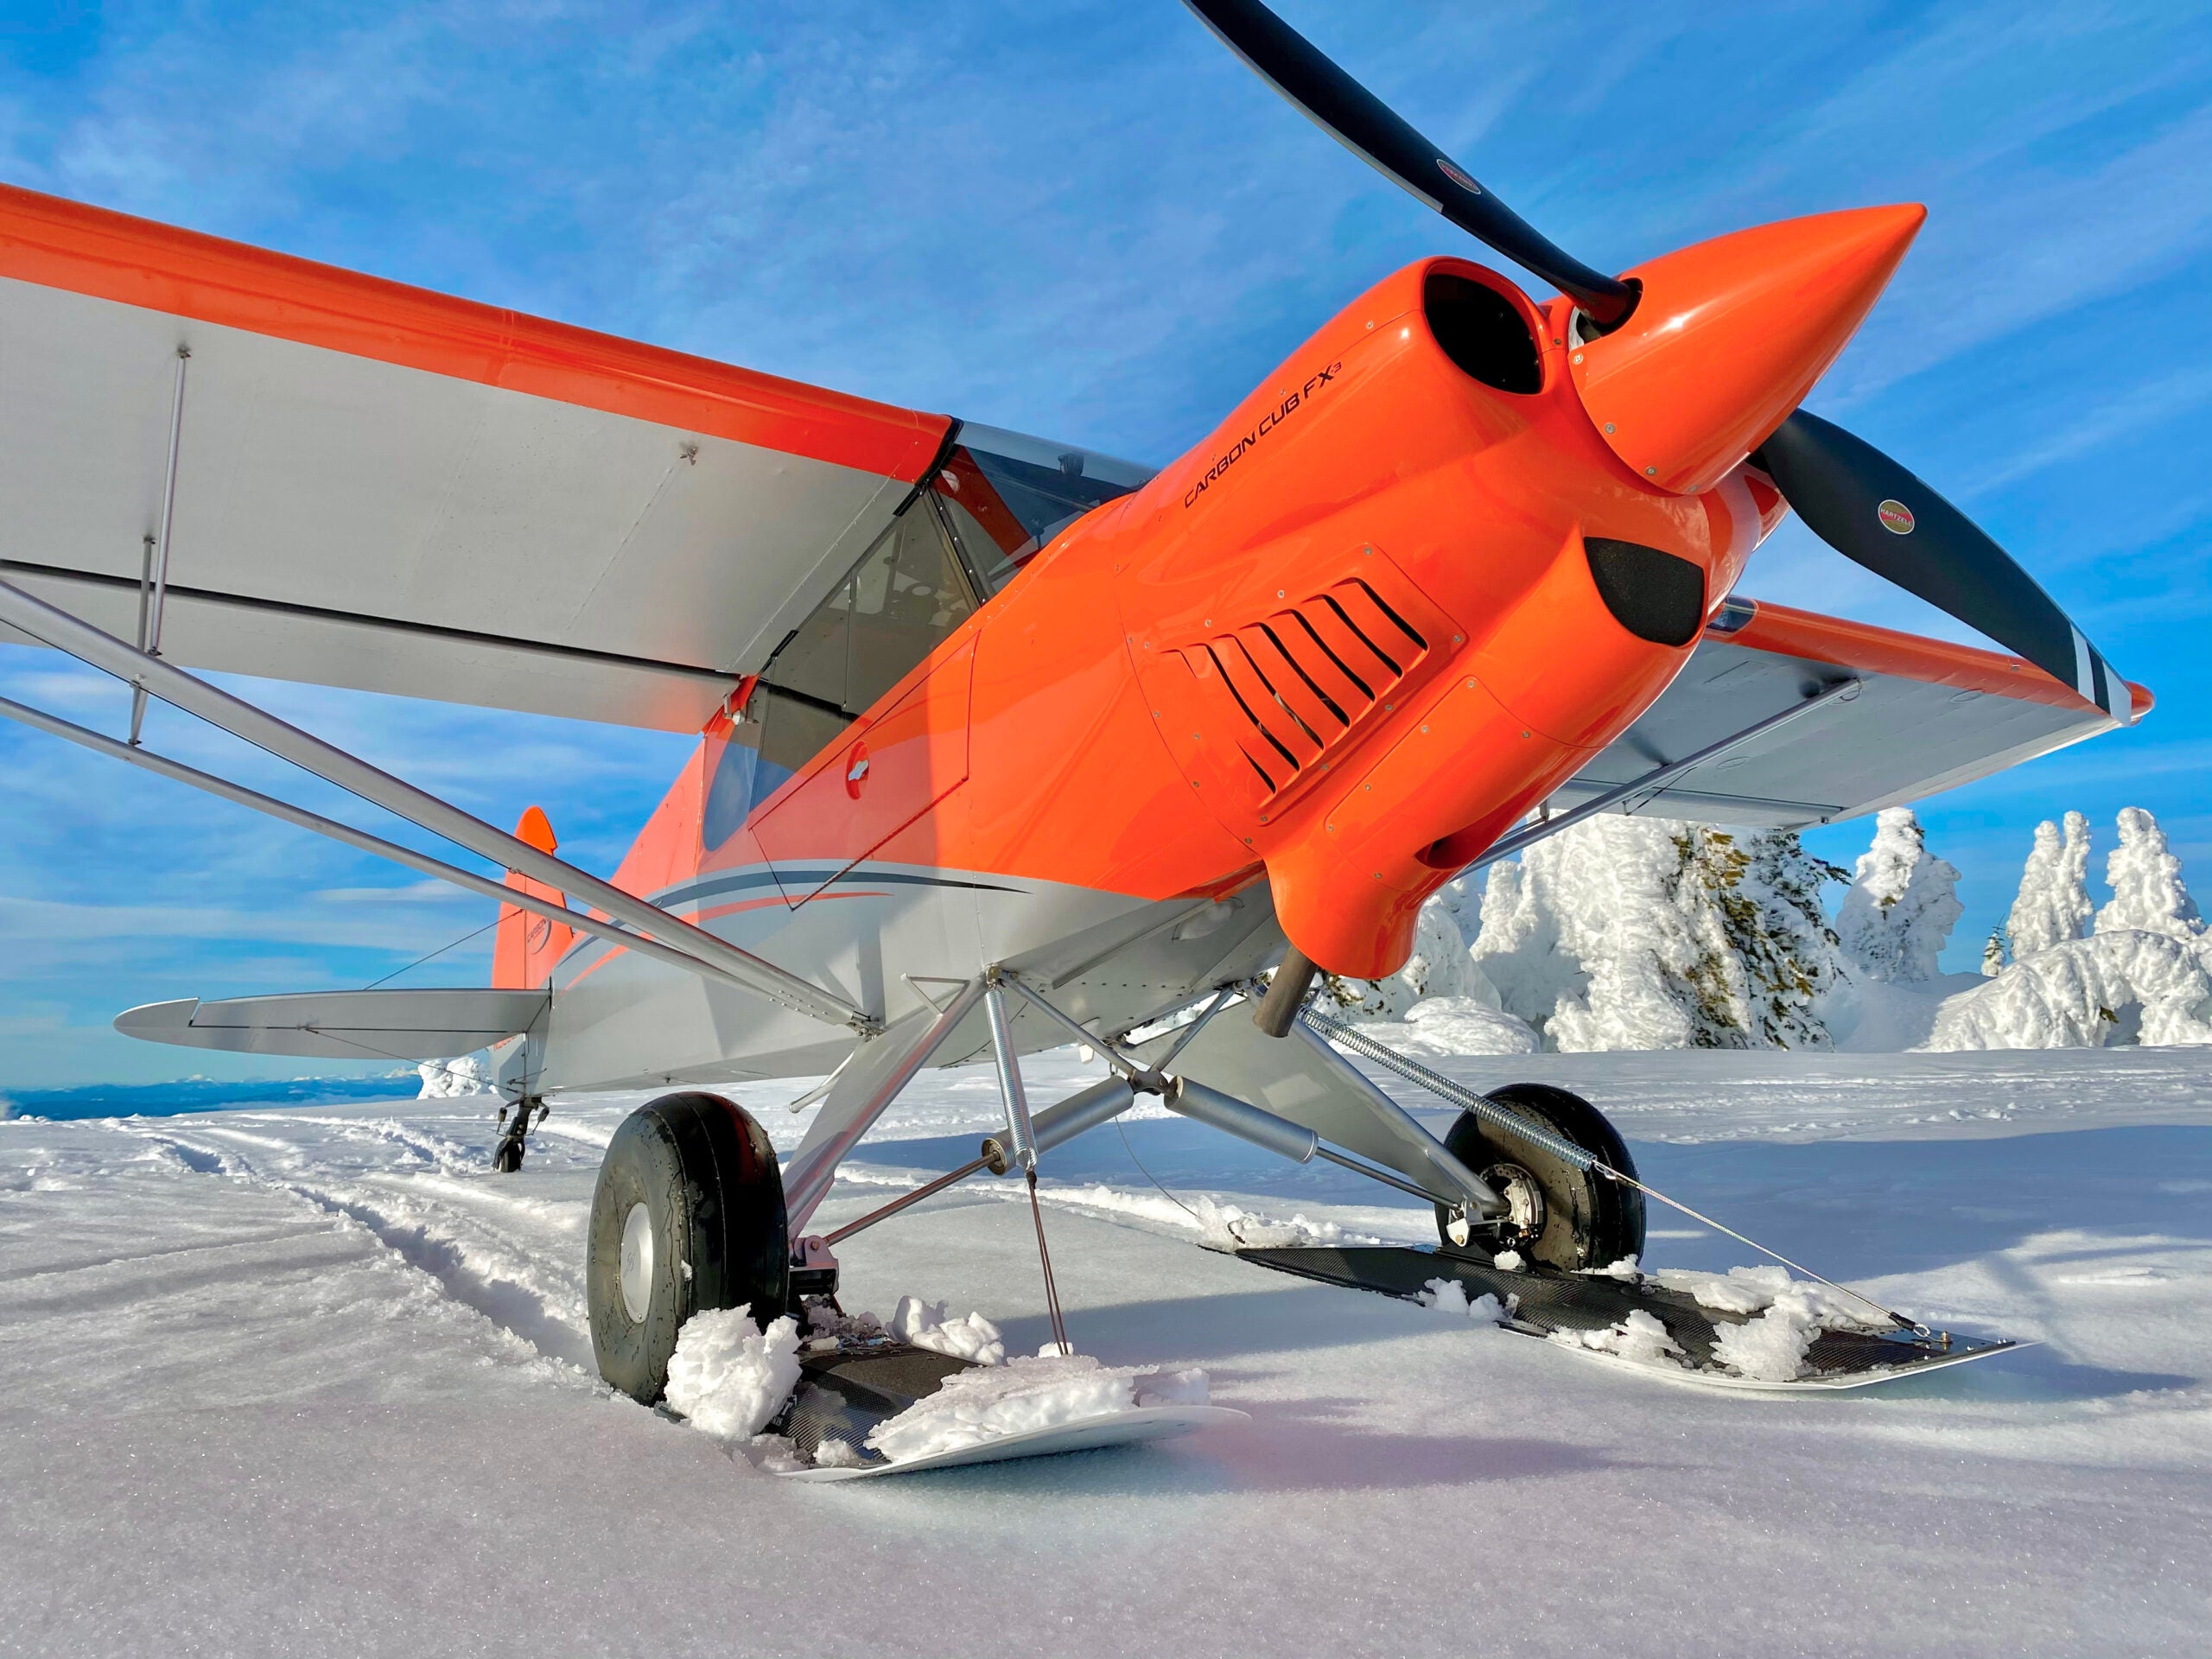 CubCrafters Acquires Summit Aircraft Skis